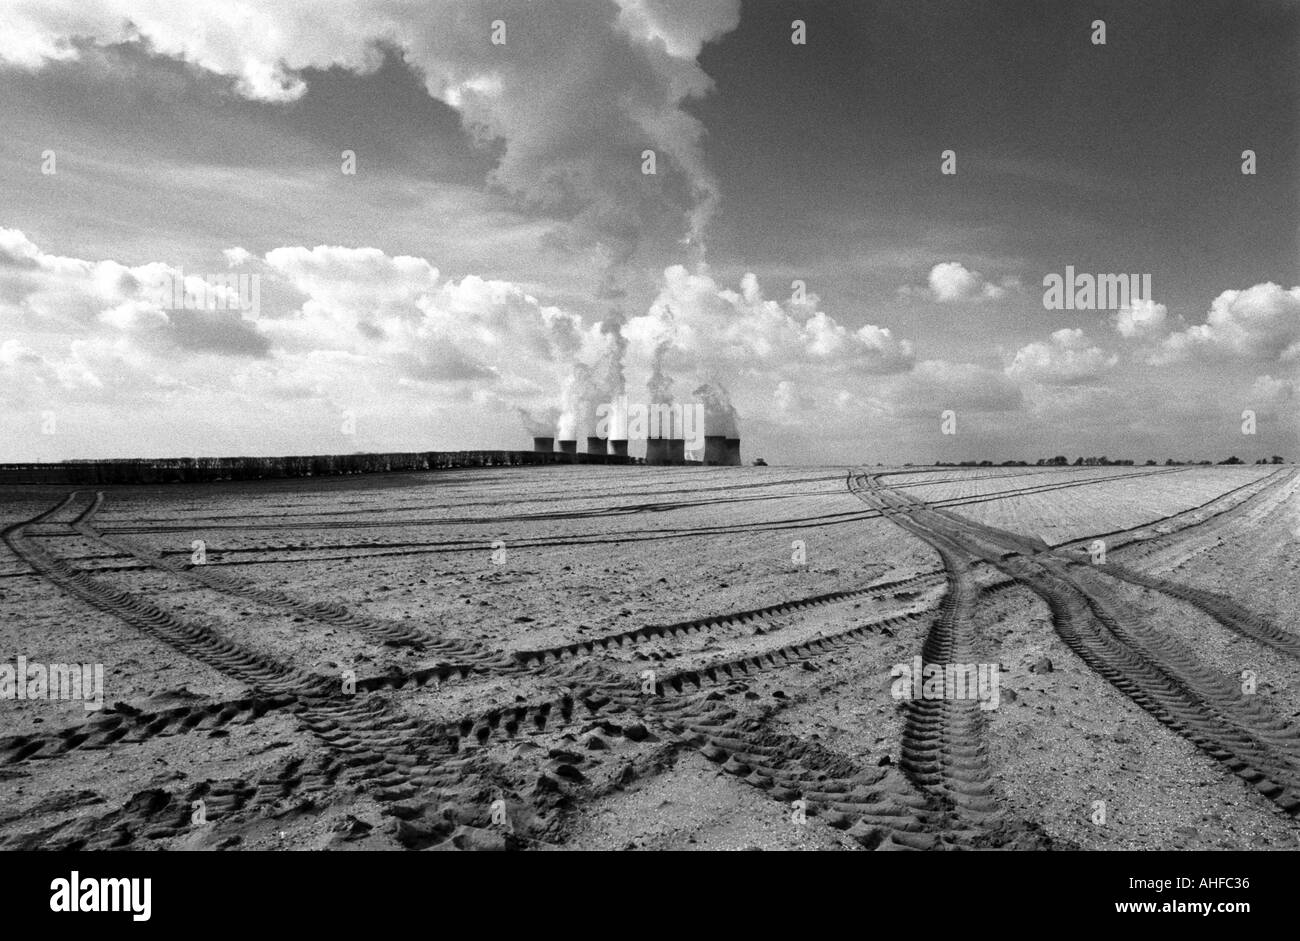 Smoke from the chimneys of a power station close to an empty agricultural field with tractor tracks, Lincolnshire, UK. Stock Photo